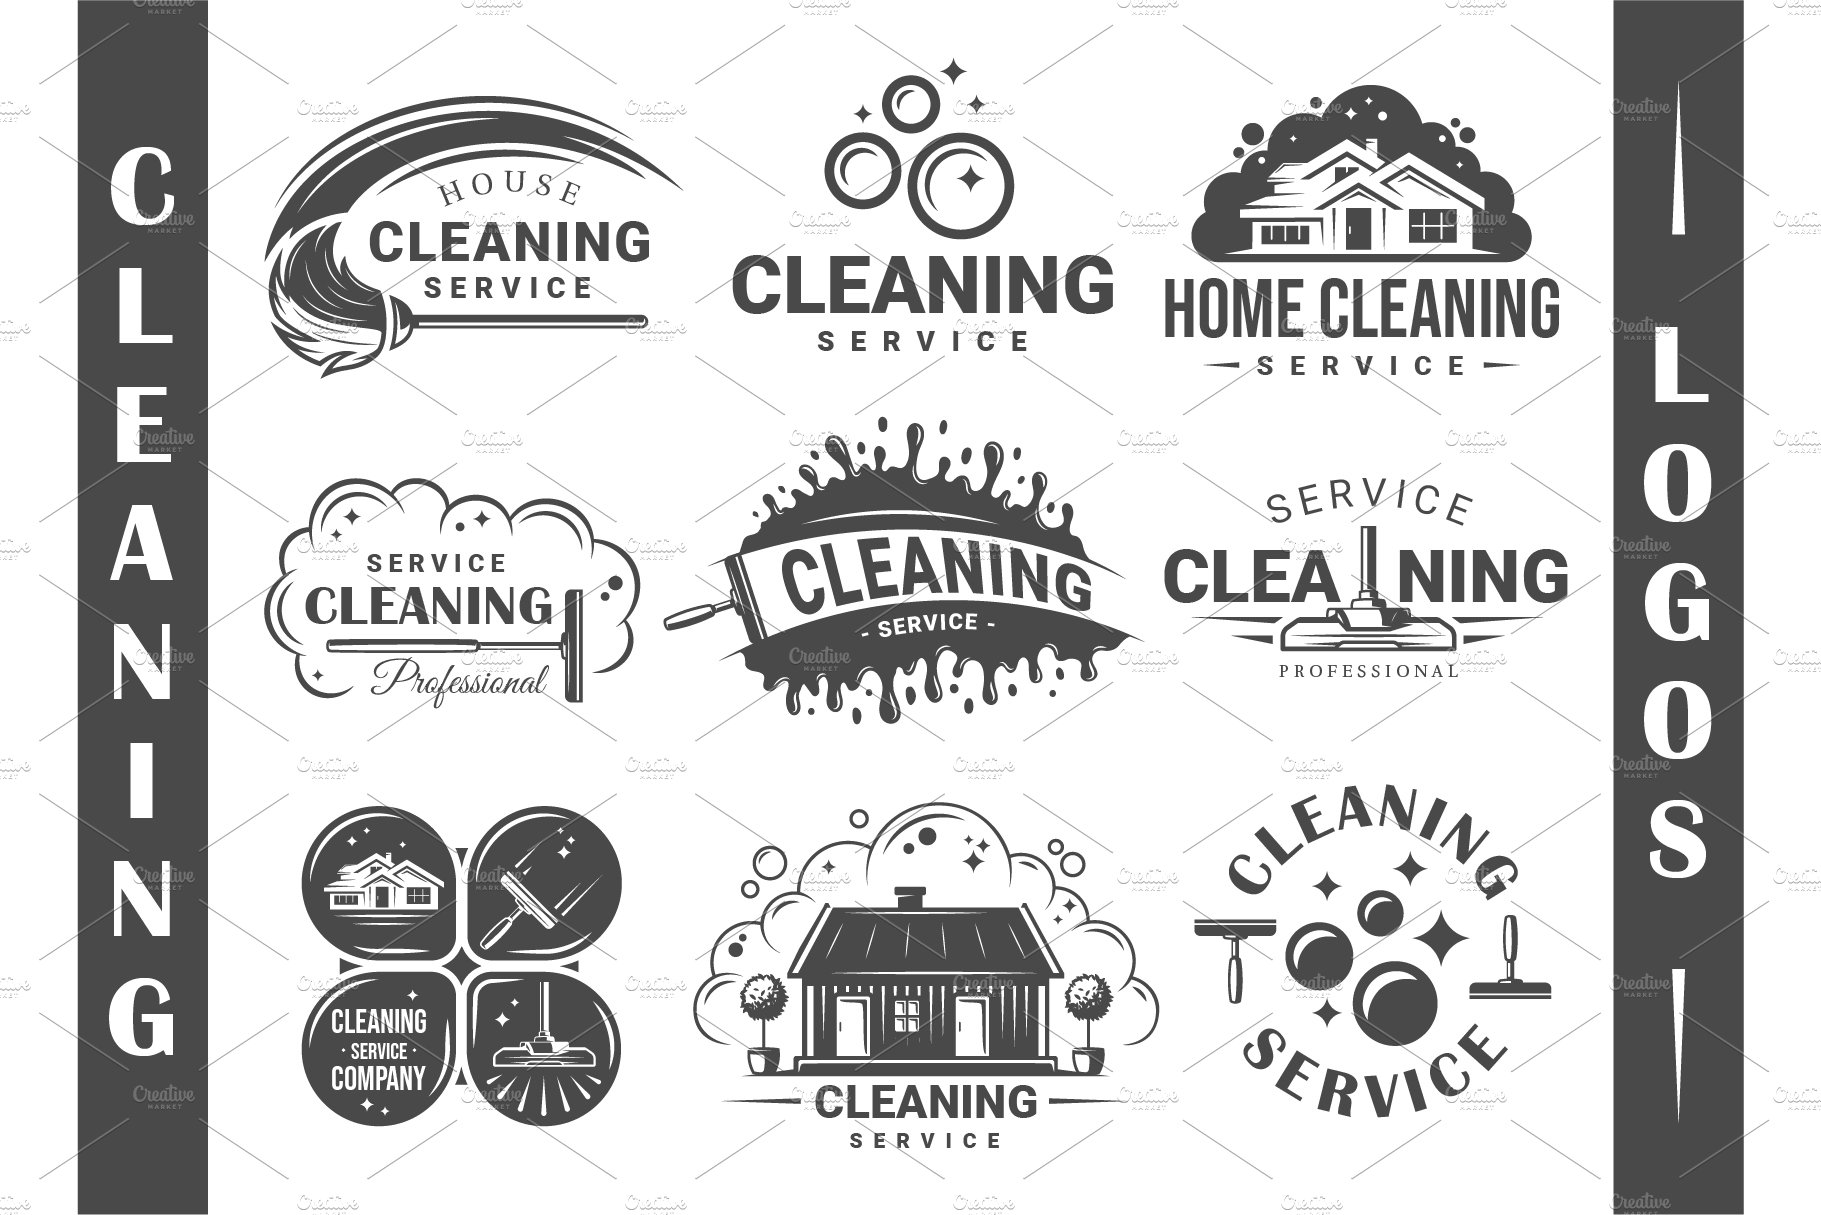 9 Cleaner Service Logos Templates 2 cover image.